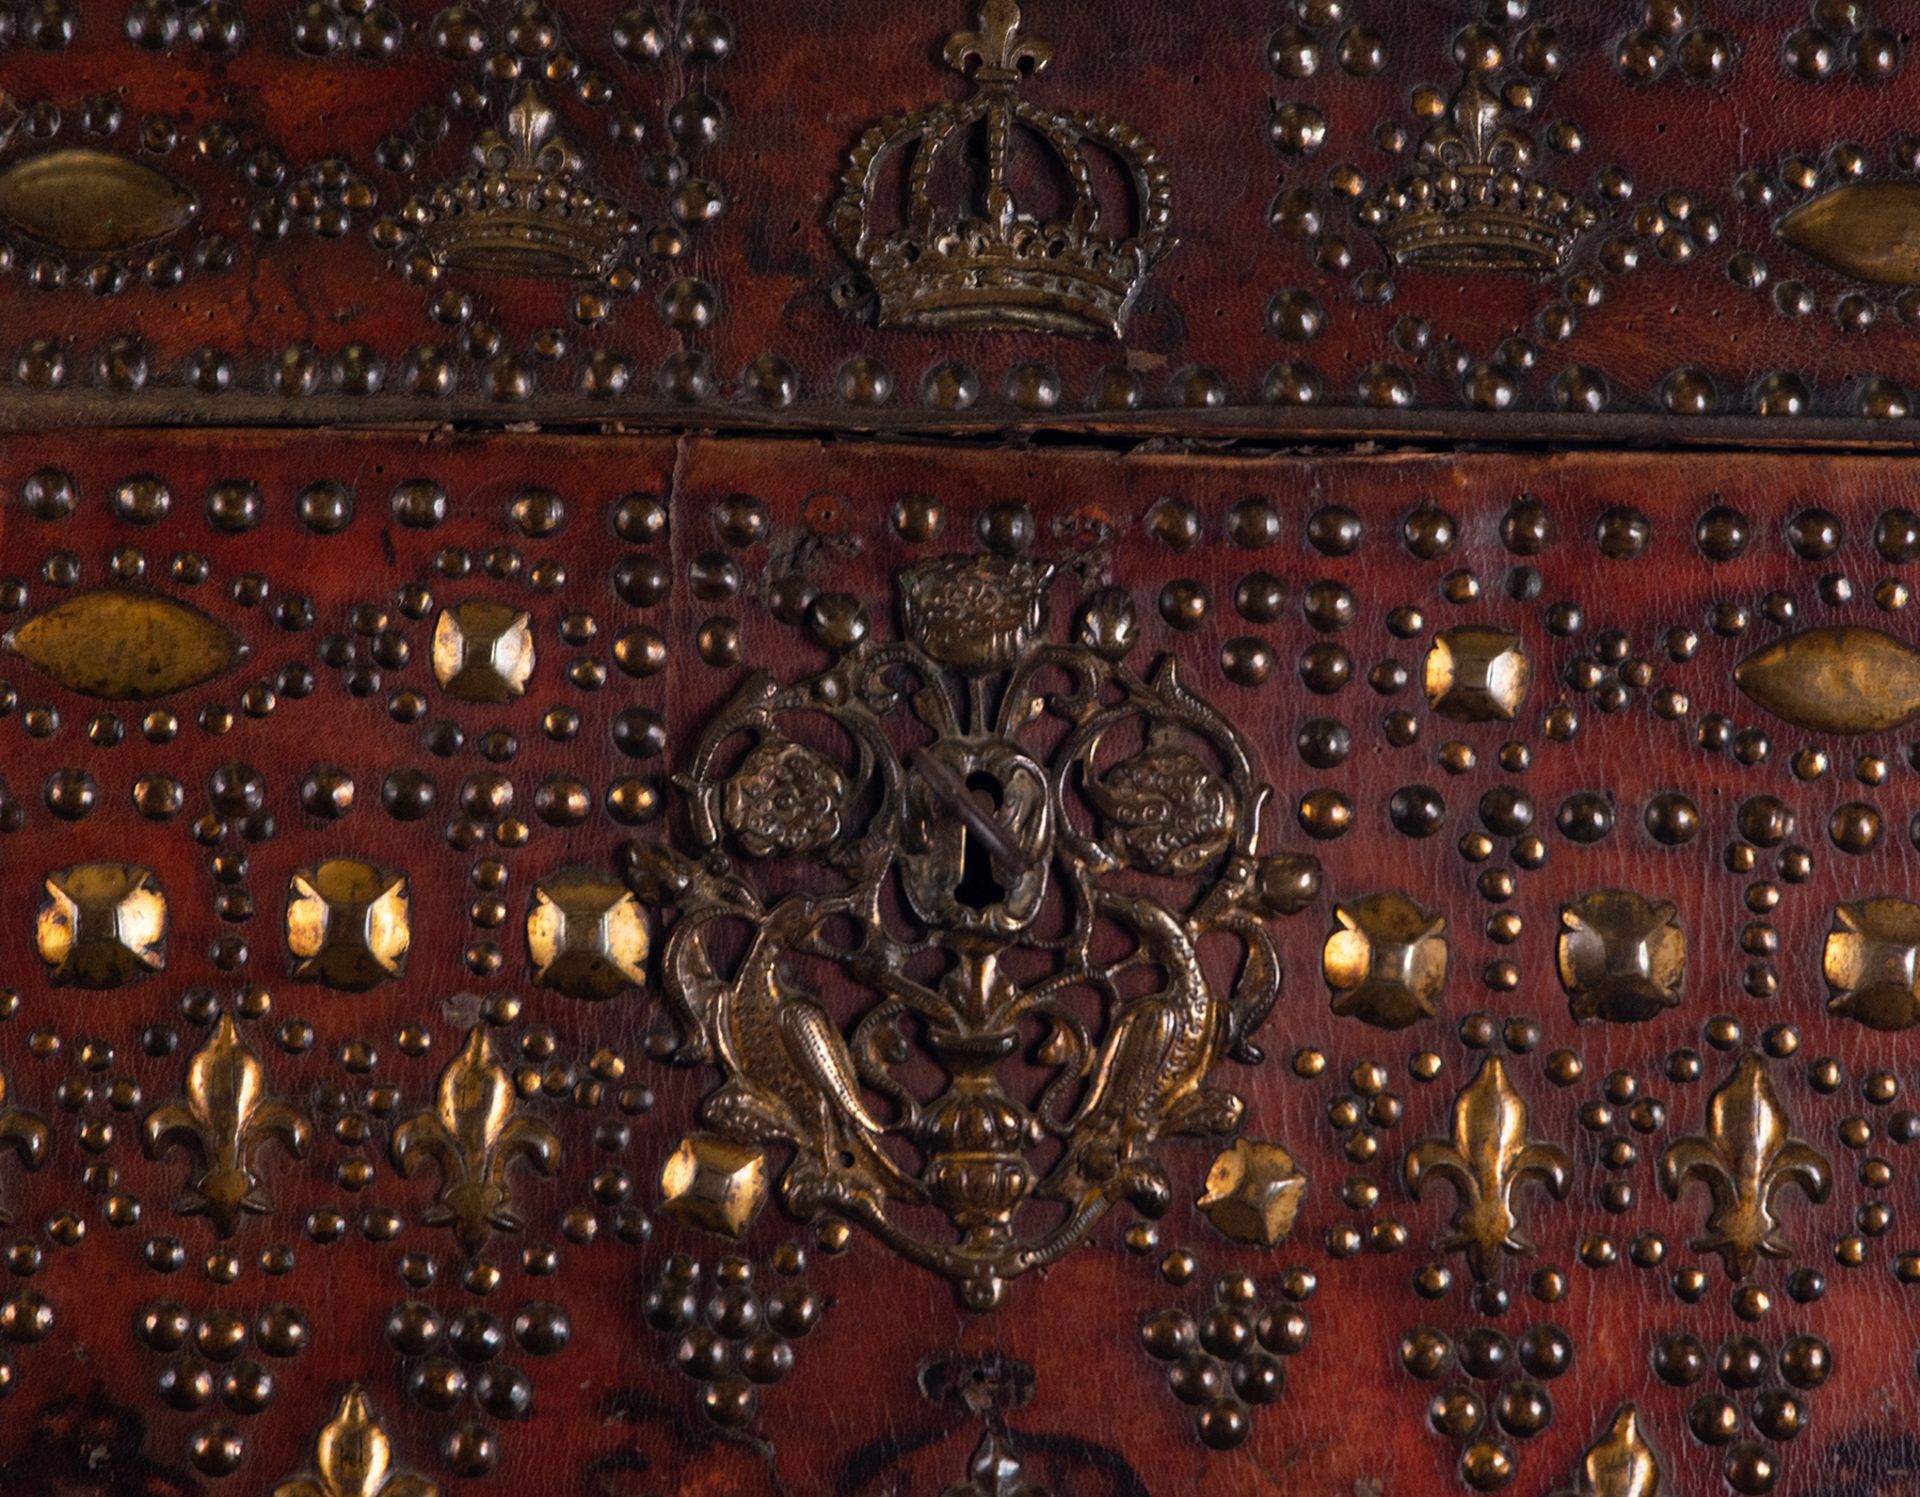 Important Royal Consort Travel Trunk, French work from the Louis XIV period, 17th century - Image 2 of 5